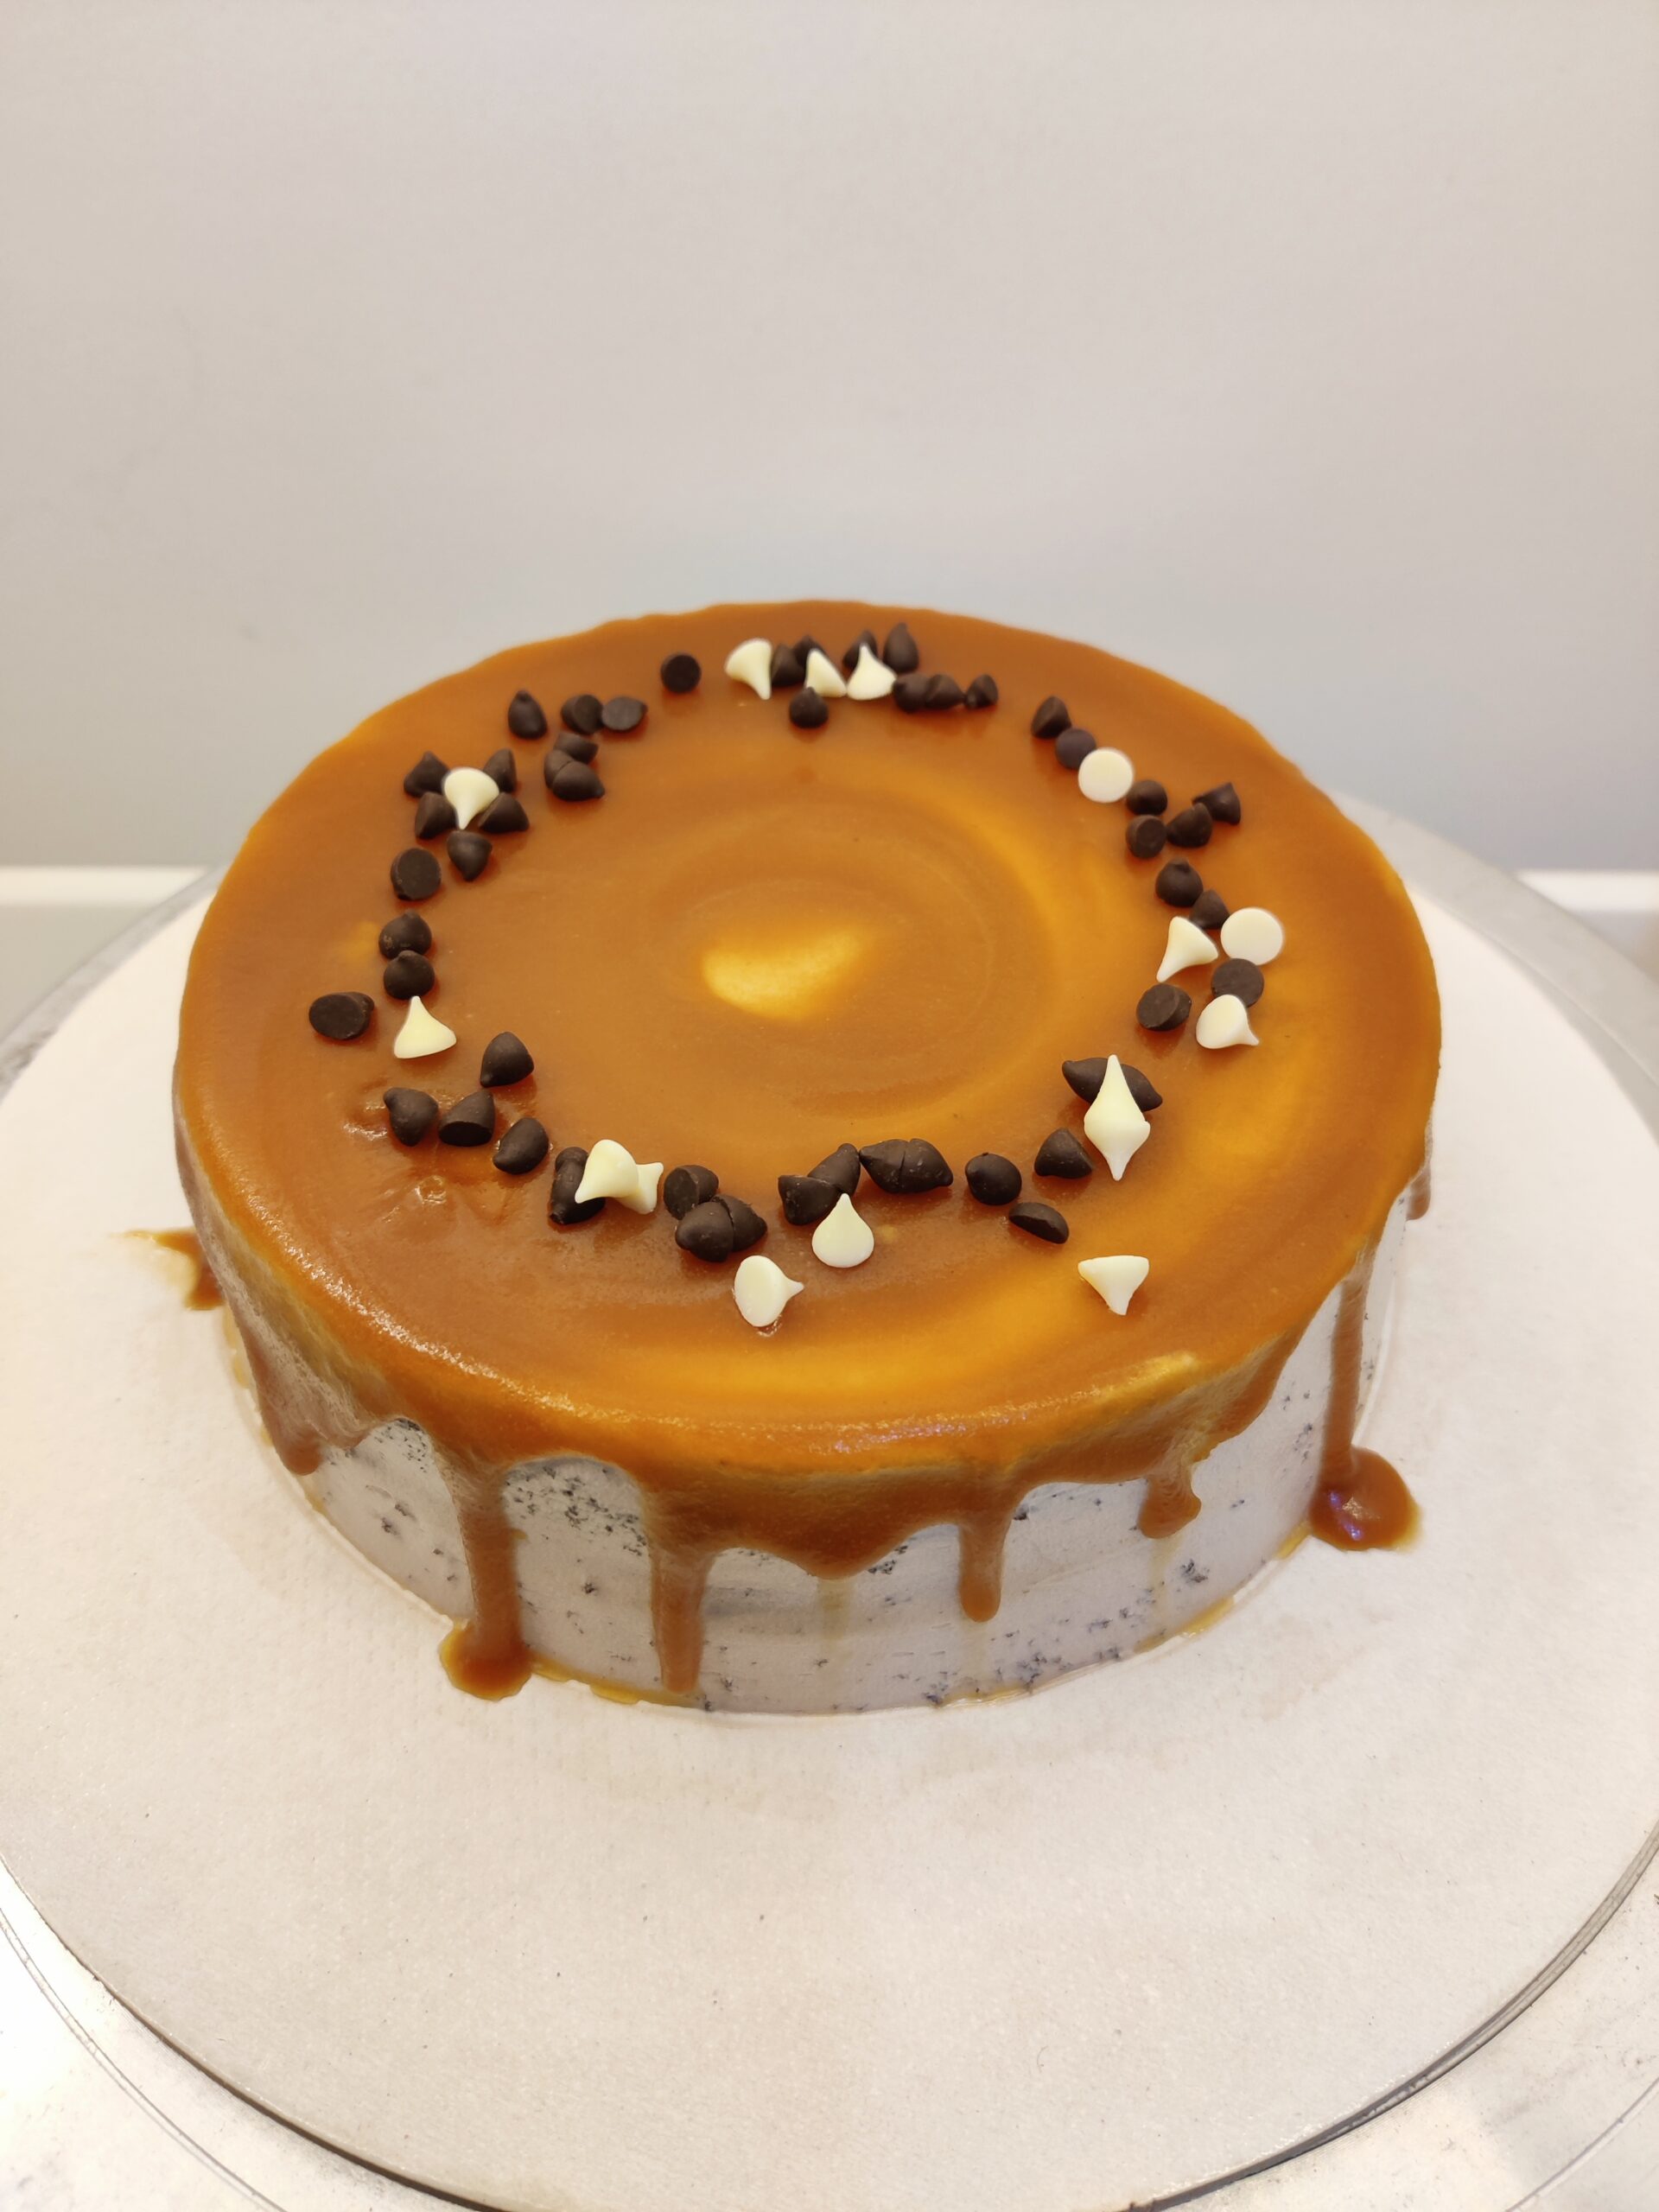 Spanish Delight Cake with Almond... - Ashus Cakes & Bakes | Facebook